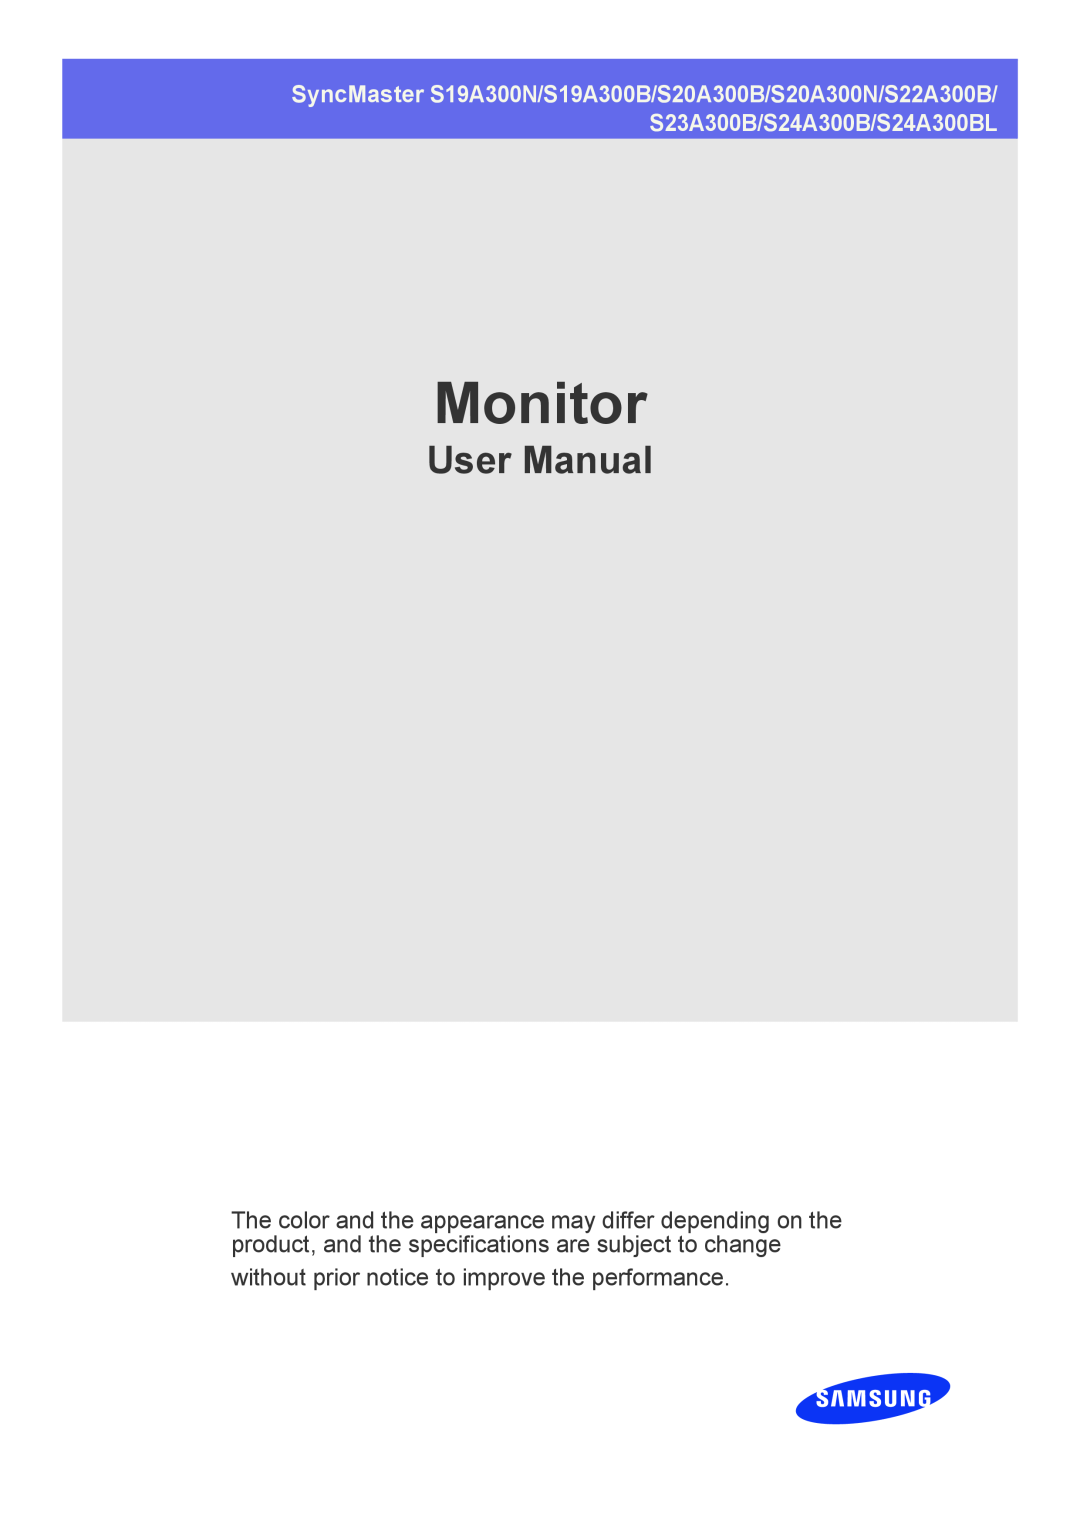 Samsung S24A300BL, S23A300B, S22A300B user manual Monitor, User Manual, without prior notice to improve the performance 